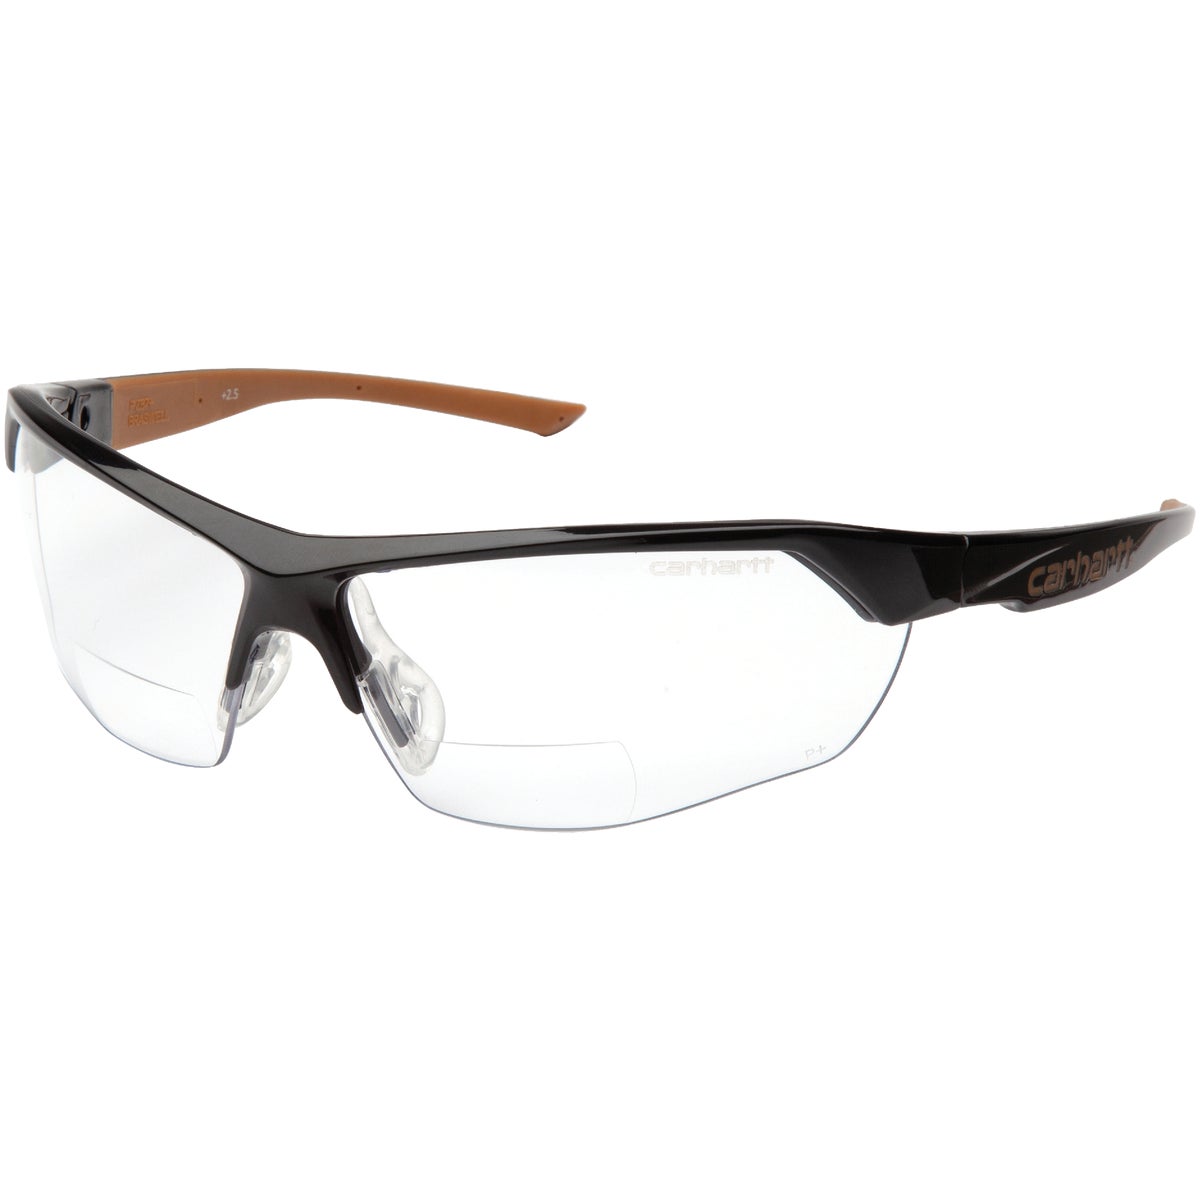 Carhartt Braswell Black Frame Reader Safety Glasses with Clear Anti-Fog Lenses, 1.5 Diopter